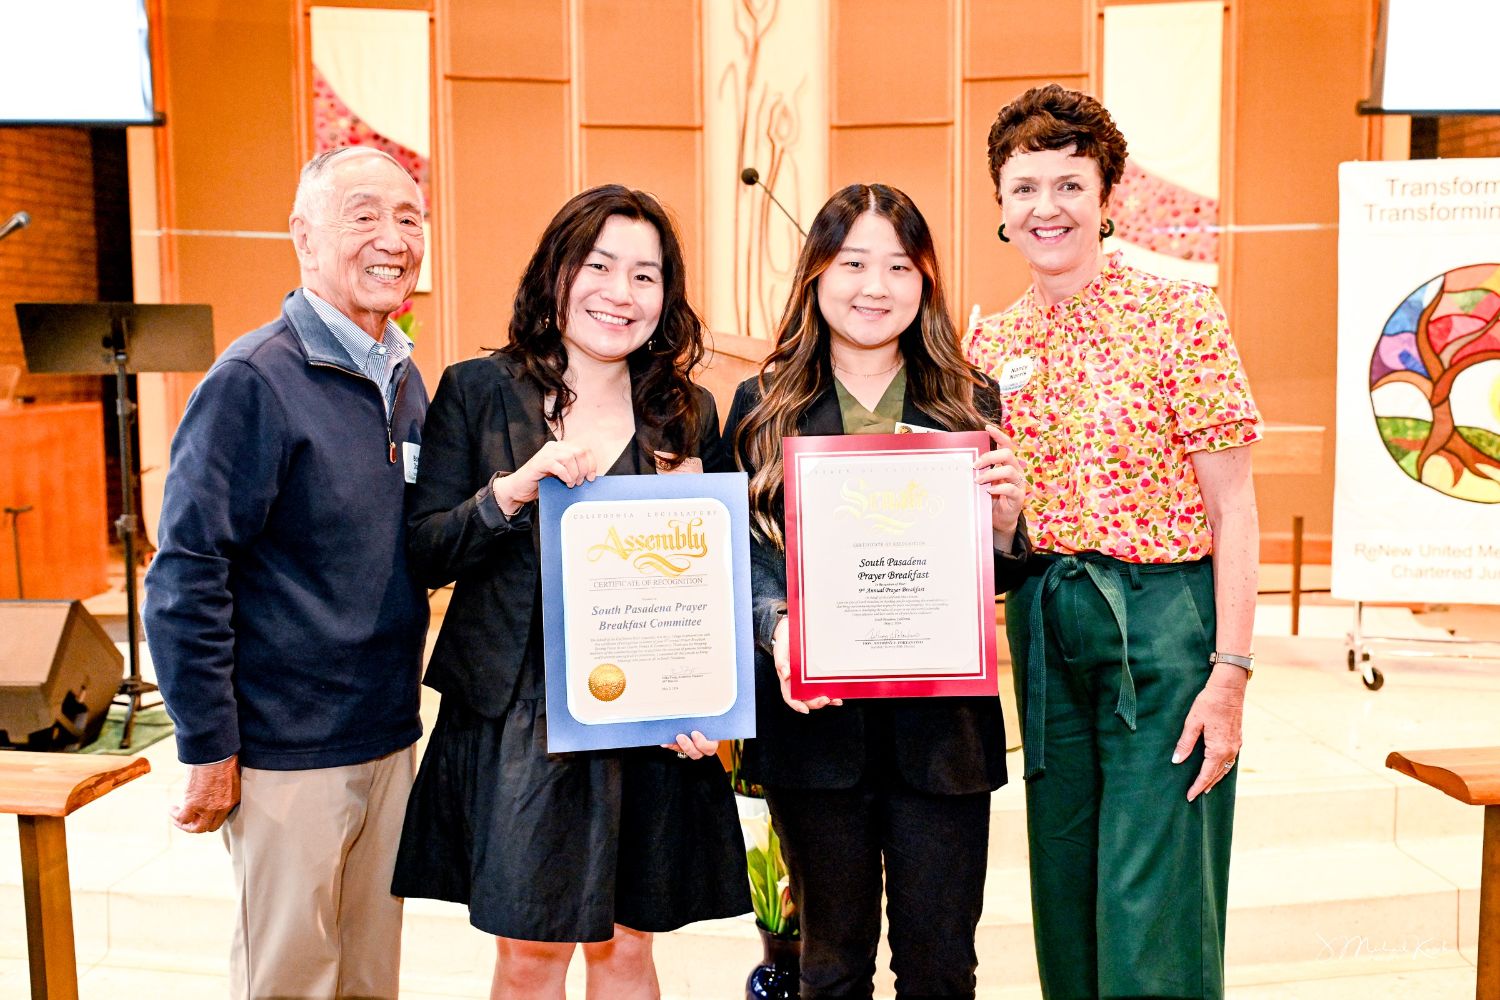 PHOTO: J. Mike Kwok | The South Pasadenan | Former Mayor and SPPB committee member Bob Joe, Jessica Tang, Erica Nam, and SPPB chair Nancy Norris — Representatives for Assemblymember Mike Fong and State Sen. Anthony Portantino (respectively) present certificates of appreciation to the South Pasadena Prayer Breakfast committee.